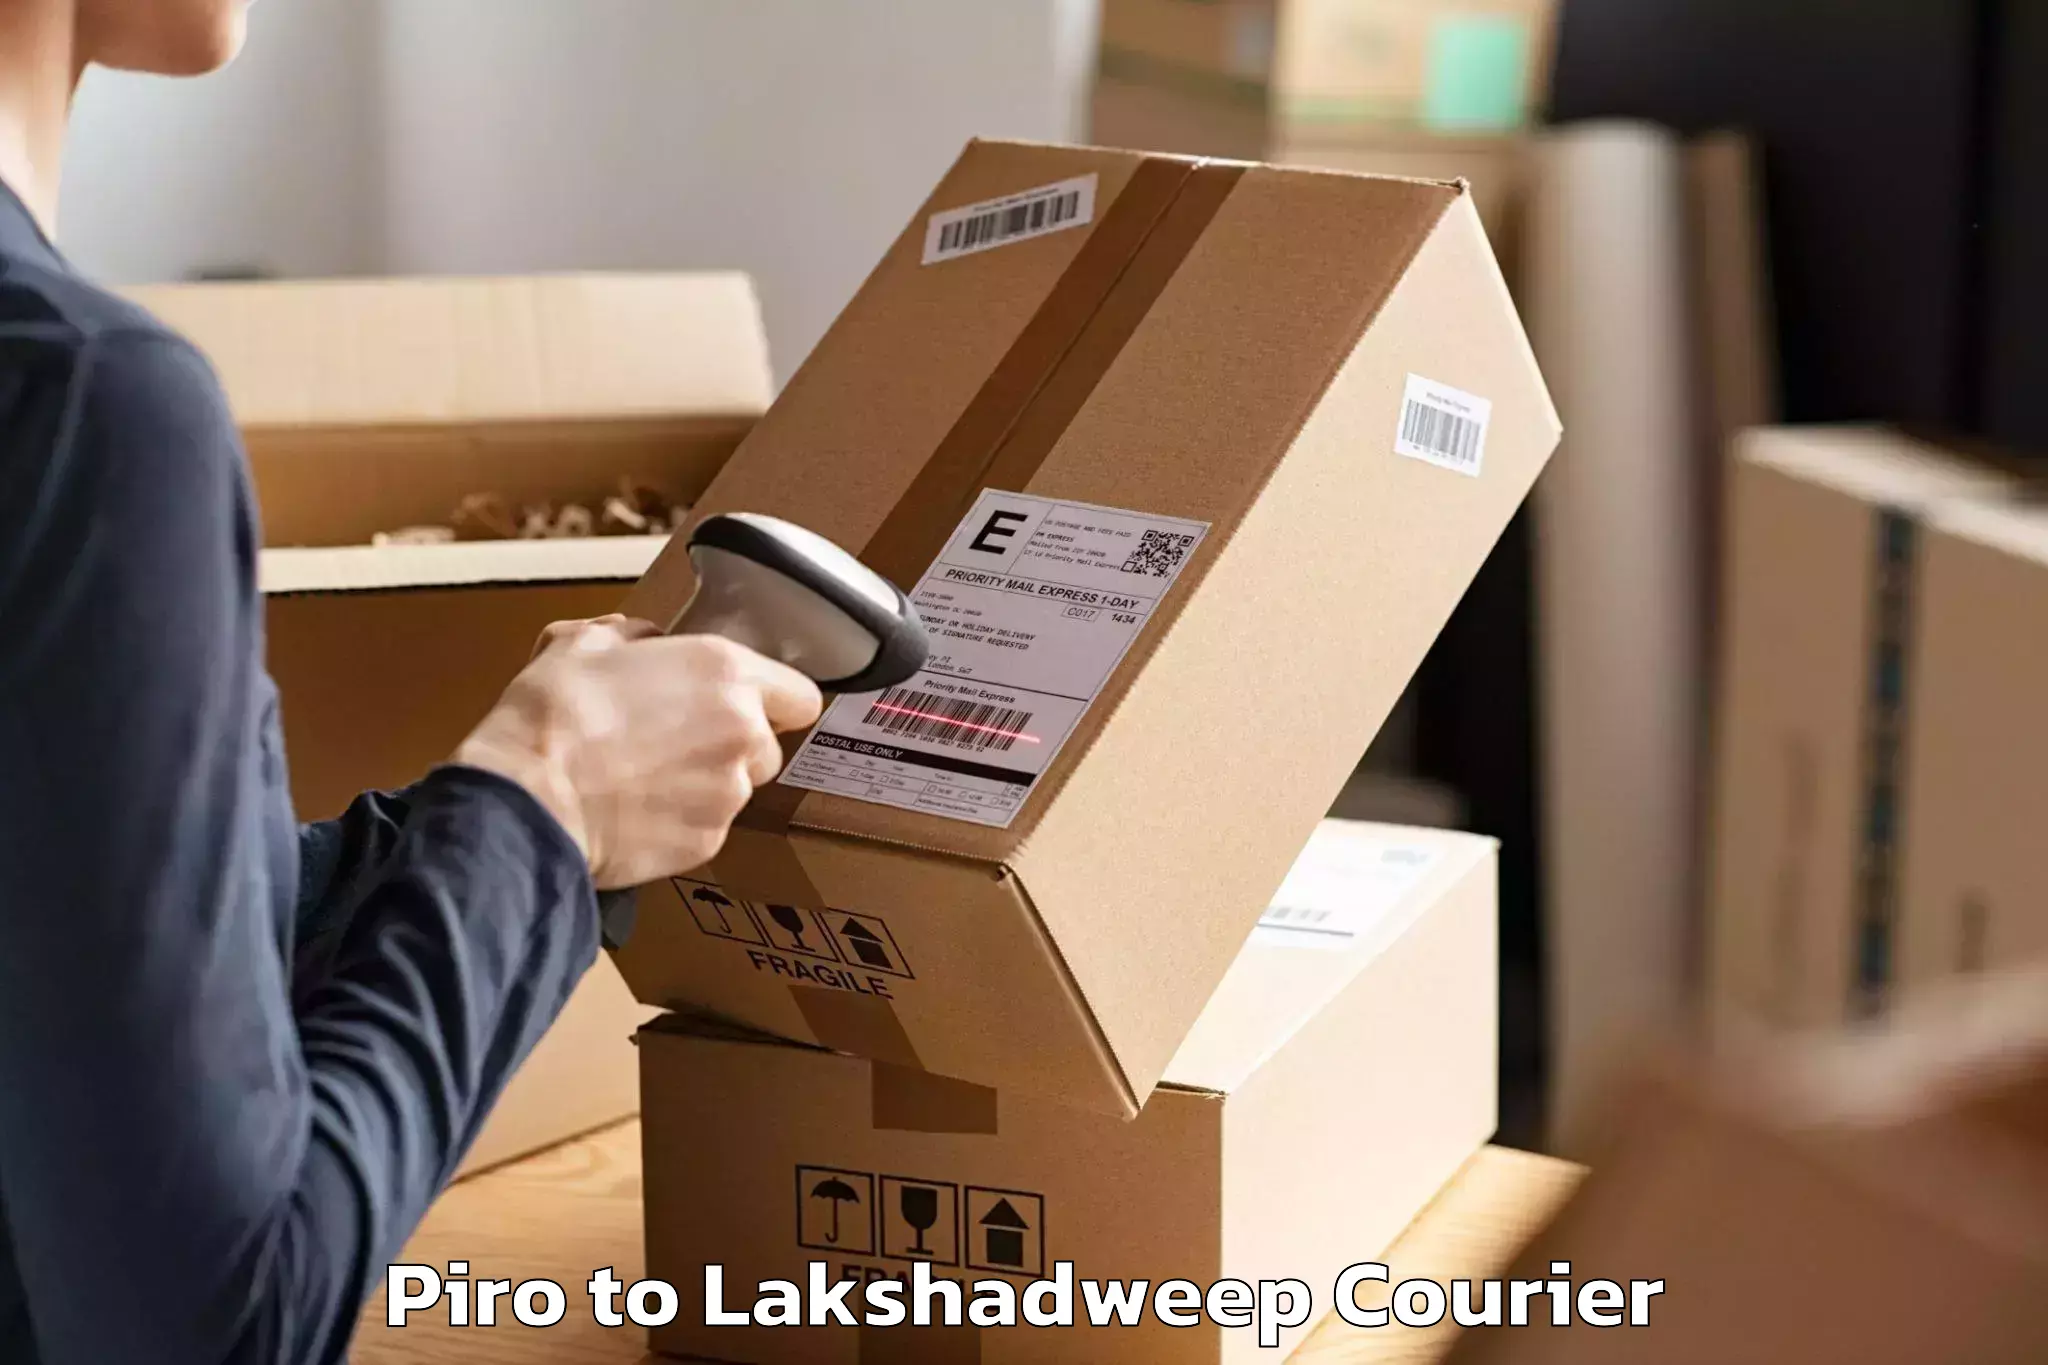 Furniture transport specialists Piro to Lakshadweep